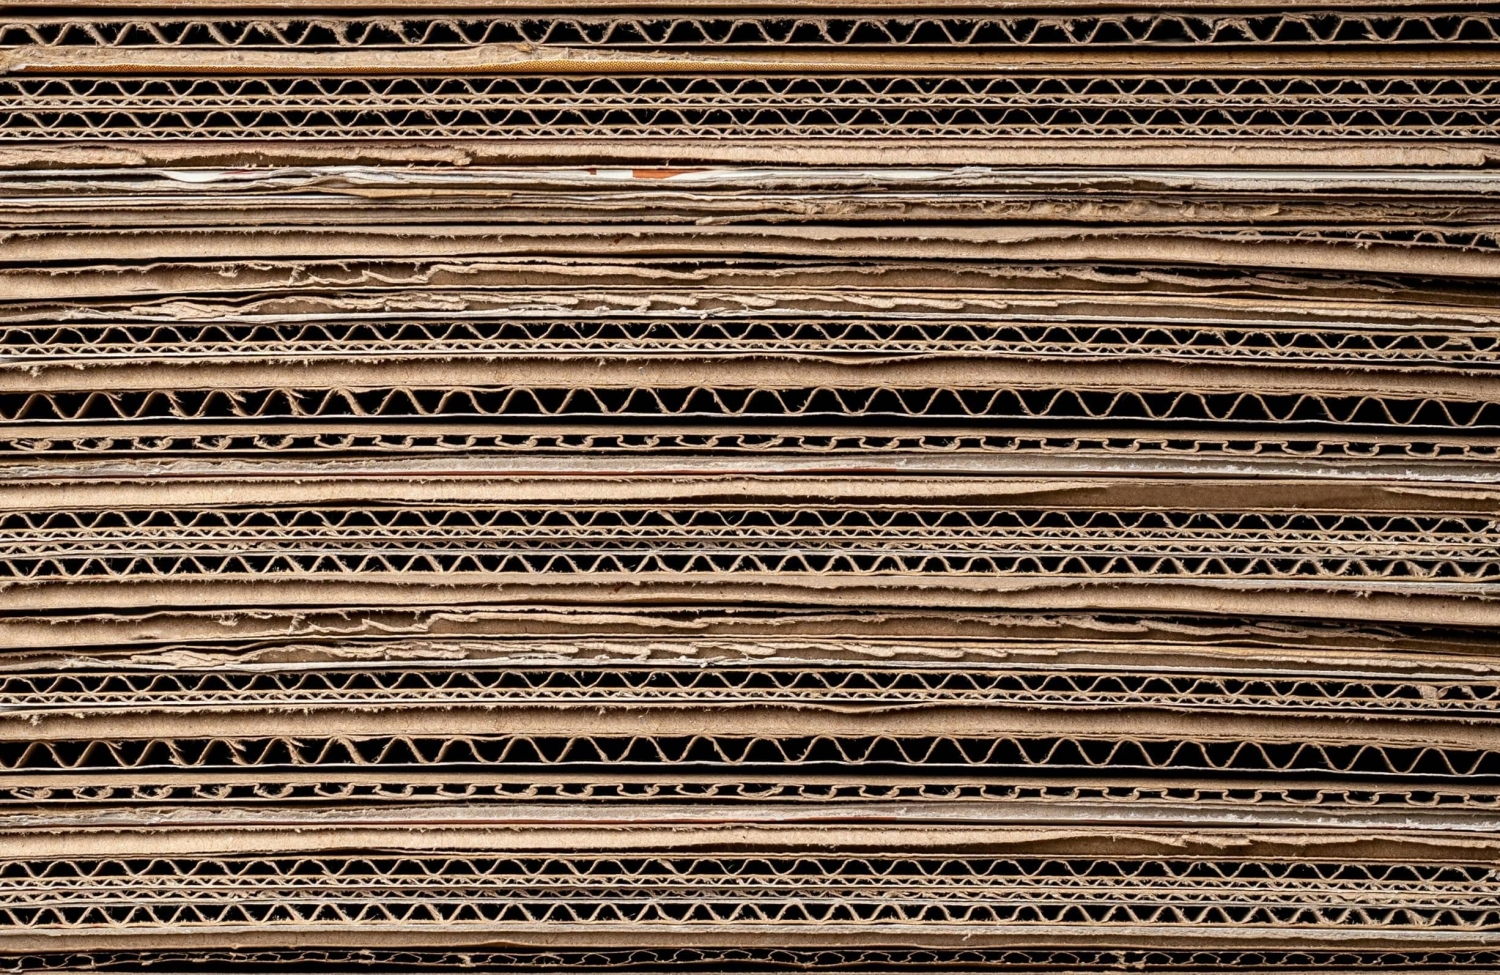 flattened cardboard boxes stacked on top of each other - Improving Wood Products Could Be a Key to Reducing Greenhouse Gas Emissions - Forestry and Environmental Resources at NC State University